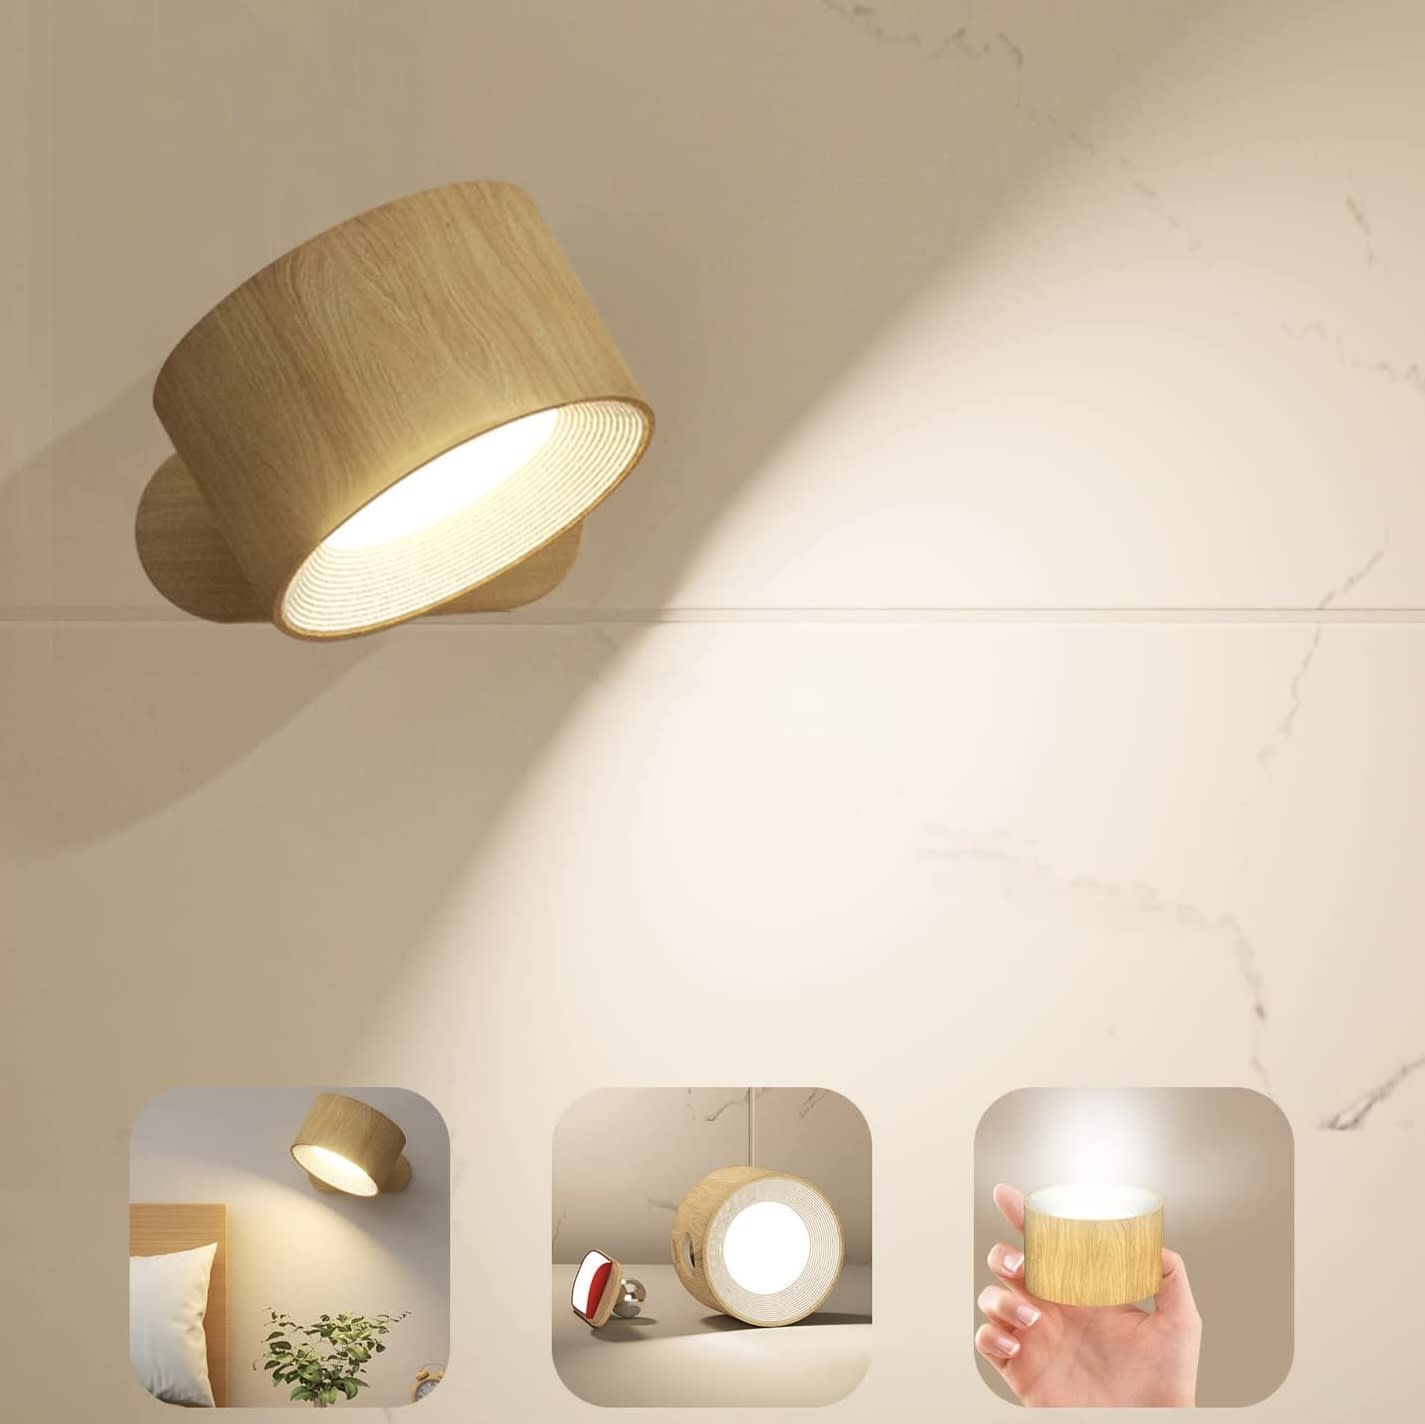 http://cdn.apartmenttherapy.info/image/upload/v1675444197/commerce/Koopala-LED-Wall-Sconces-Rechargeable-Battery-amazon.jpg